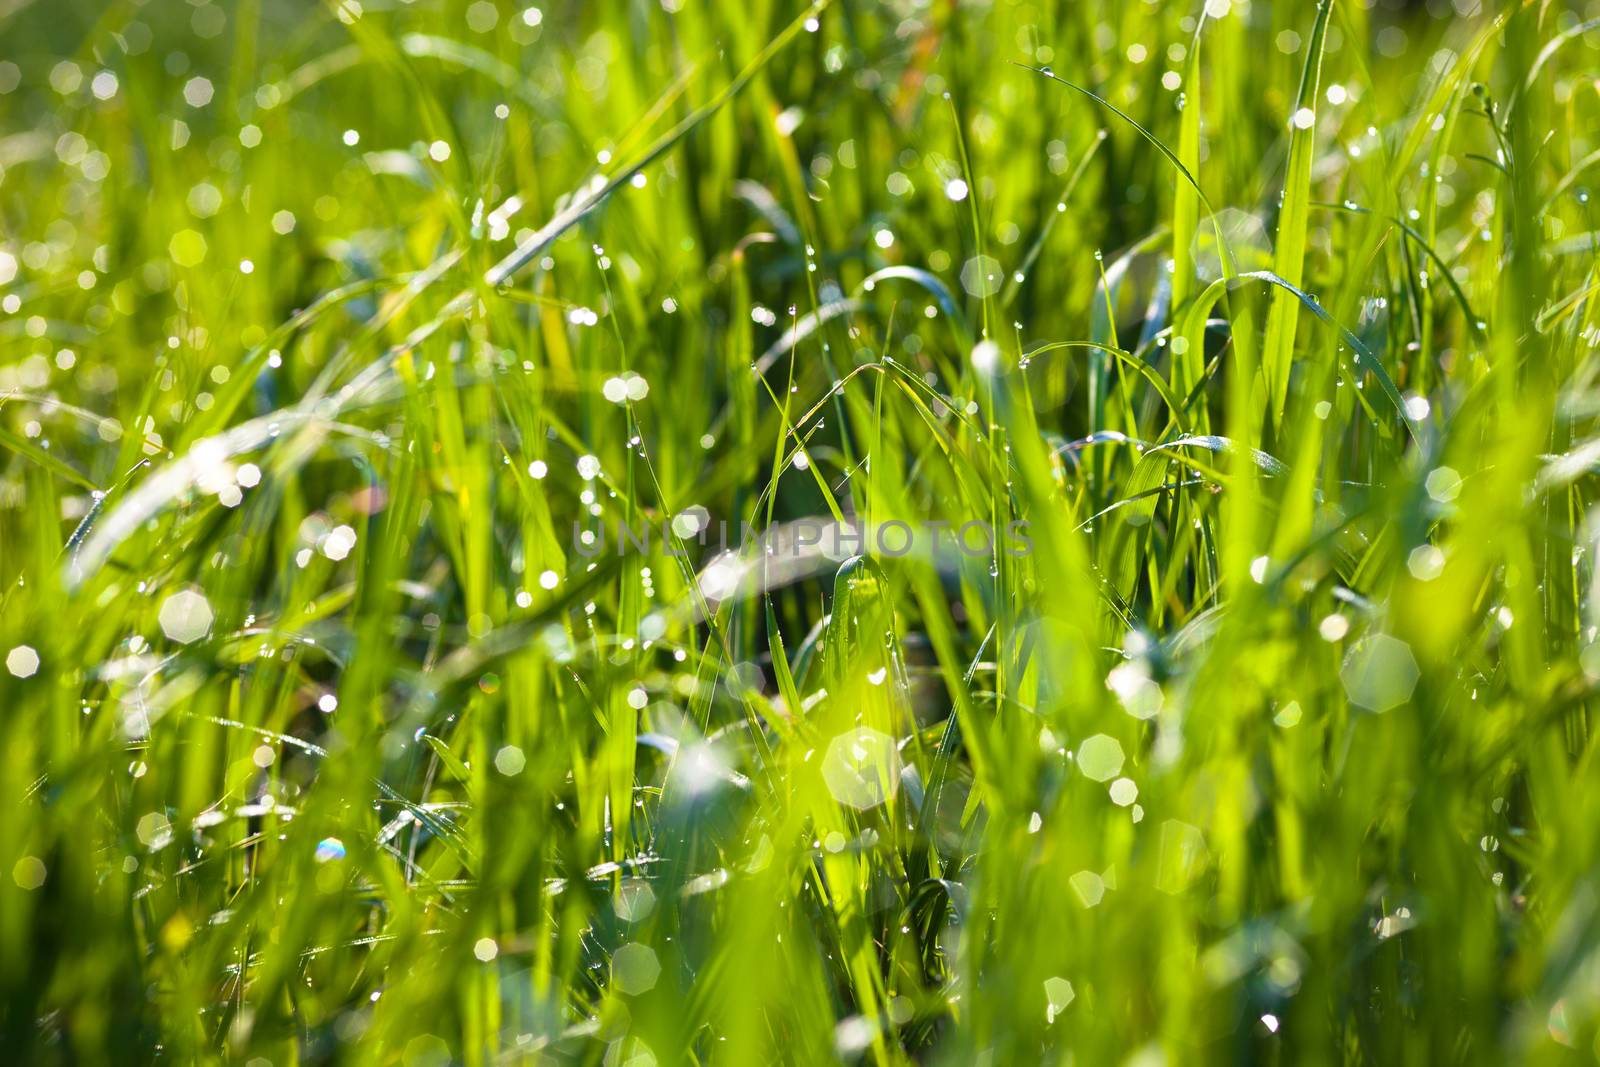 Dew drops on the green grass shining in the sun